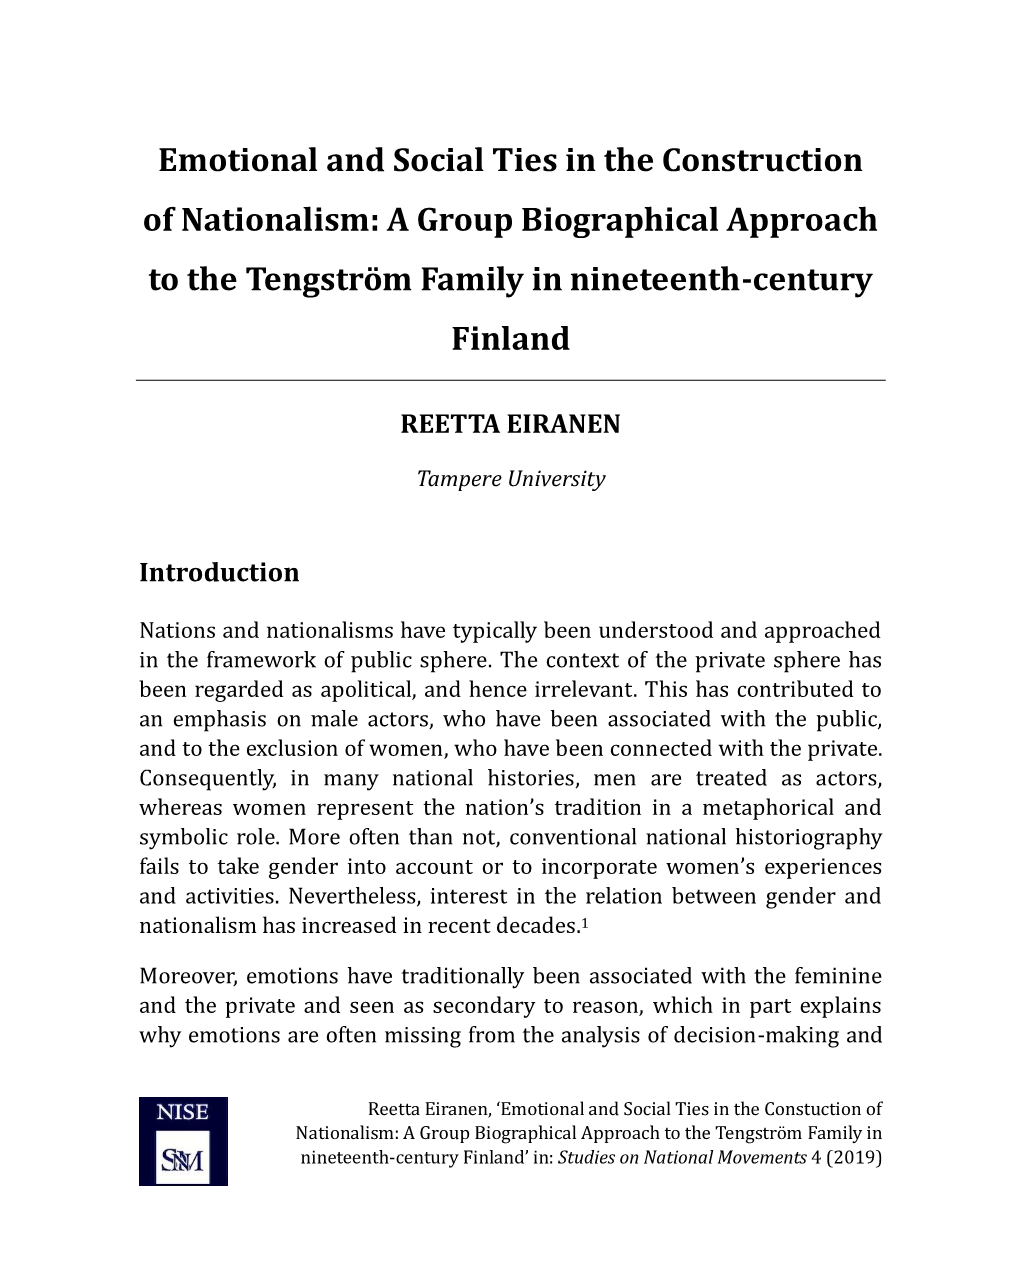 Emotional and Social Ties in the Construction of Nationalism: a Group Biographical Approach to the Tengström Family in Nineteenth-Century Finland